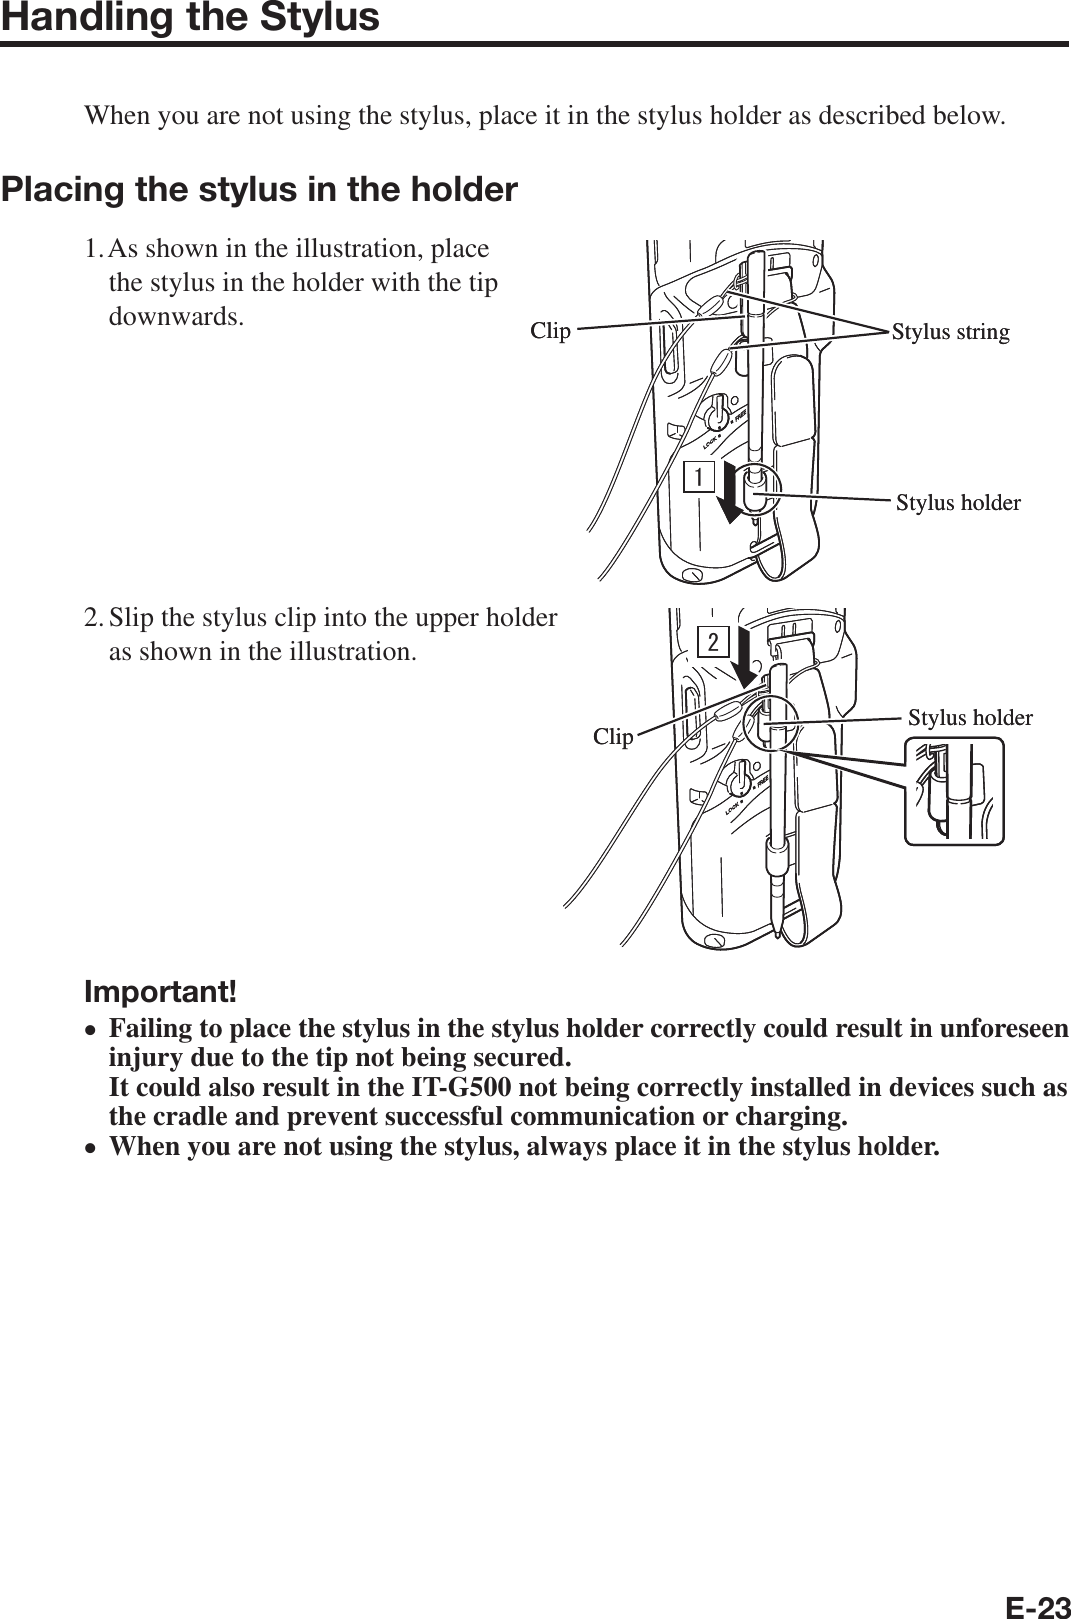 E-23Handling the StylusWhen you are not using the stylus, place it in the stylus holder as described below.Placing the stylus in the holder1. As shown in the illustration, place the stylus in the holder with the tip downwards.2. Slip the stylus clip into the upper holder as shown in the illustration.Important!Failing to place the stylus in the stylus holder correctly could result in unforeseen injury due to the tip not being secured.It could also result in the IT-G500 not being correctly installed in devices such as the cradle and prevent successful communication or charging.When you are not using the stylus, always place it in the stylus holder.••ClipStylus holderStylus stringClipStylus holderStylus string Stylus holderClip Stylus holderClip